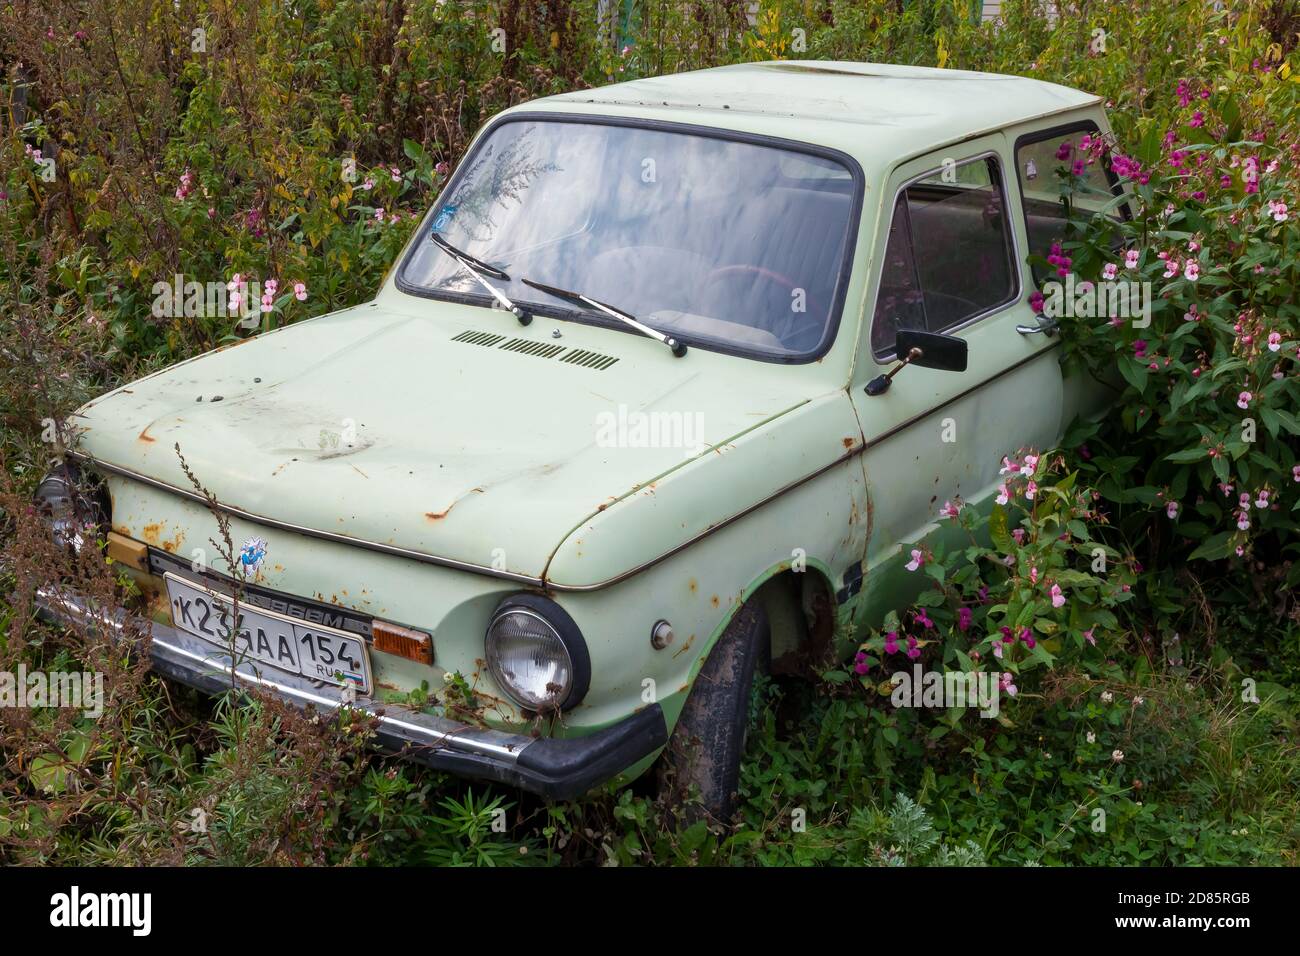 Novosibirsk, Russia - 09.19.2020: An old abandoned car with peeled paint and disassembled parts of the ZAZ brand of the Soviet past, overgrown with gr Stock Photo